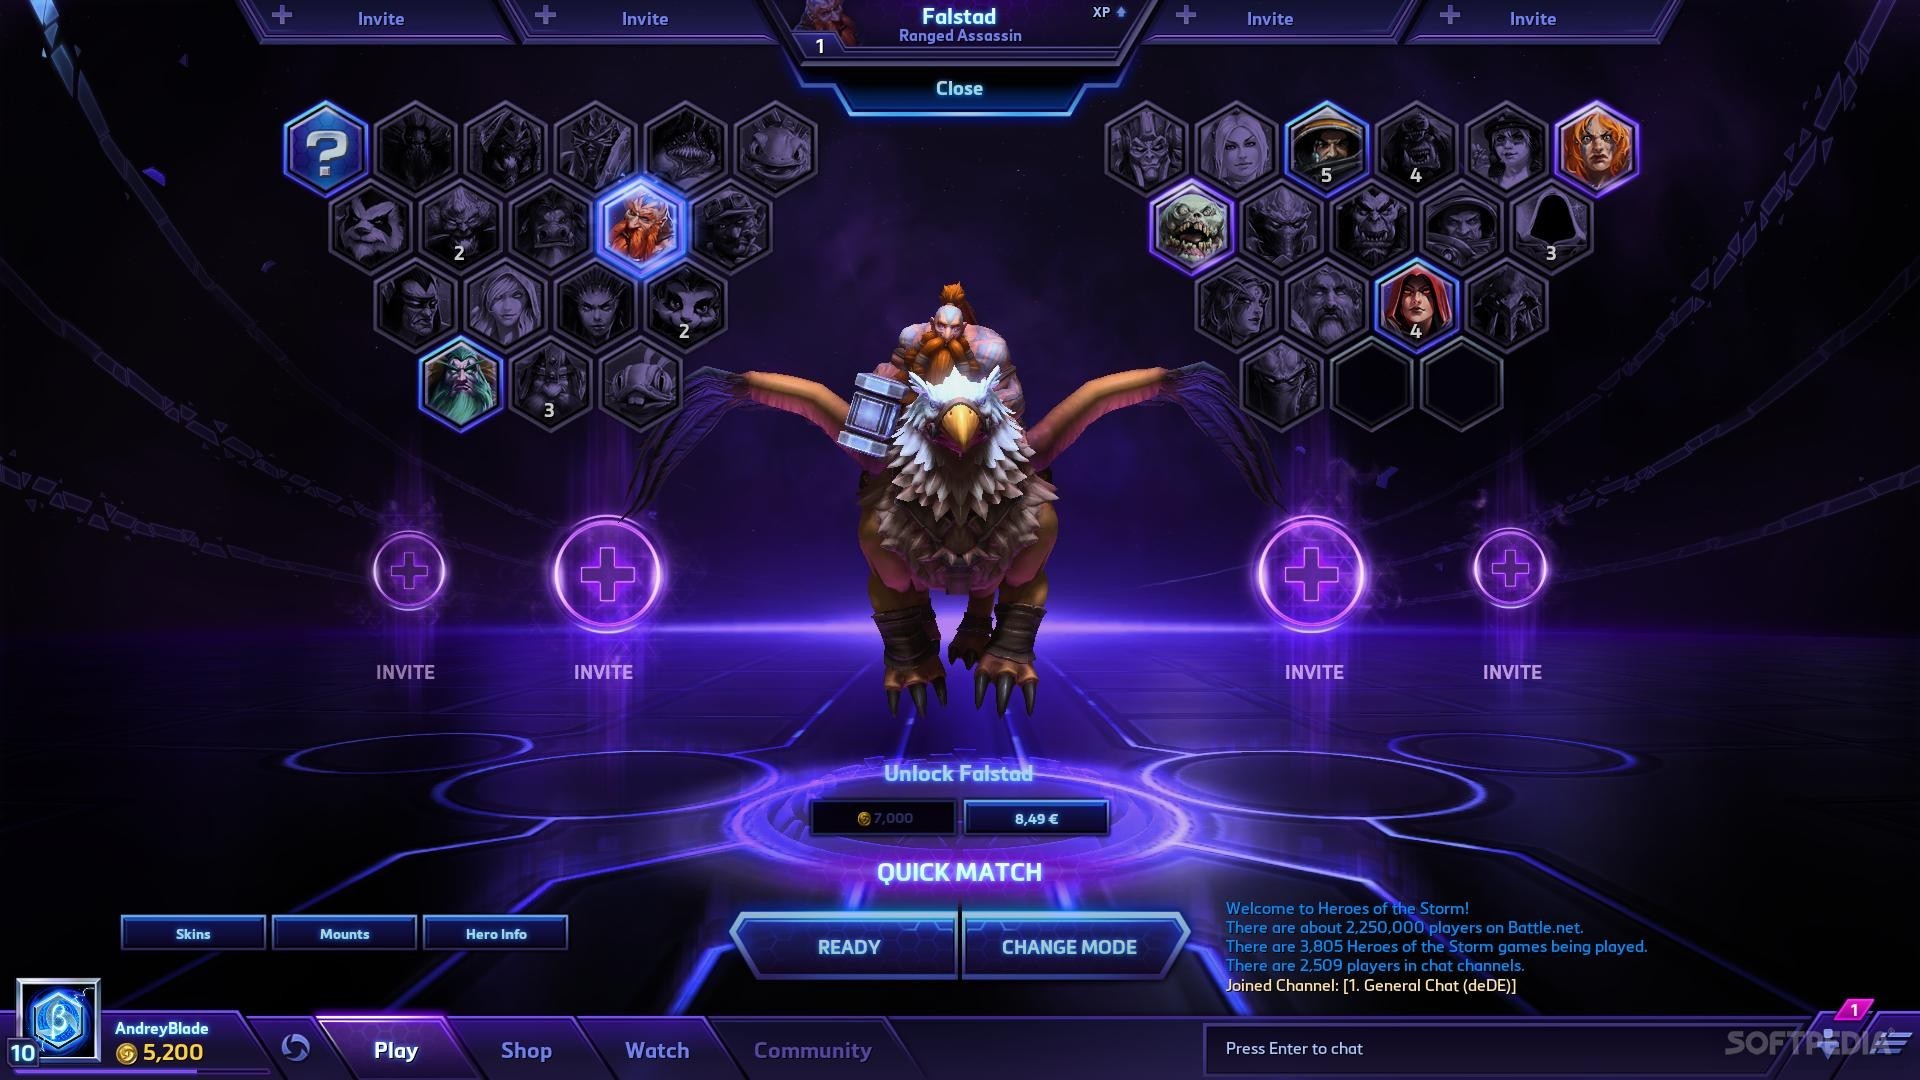 Get 20 Free Heroes Of The Storm Characters Starting Next Week - GameSpot